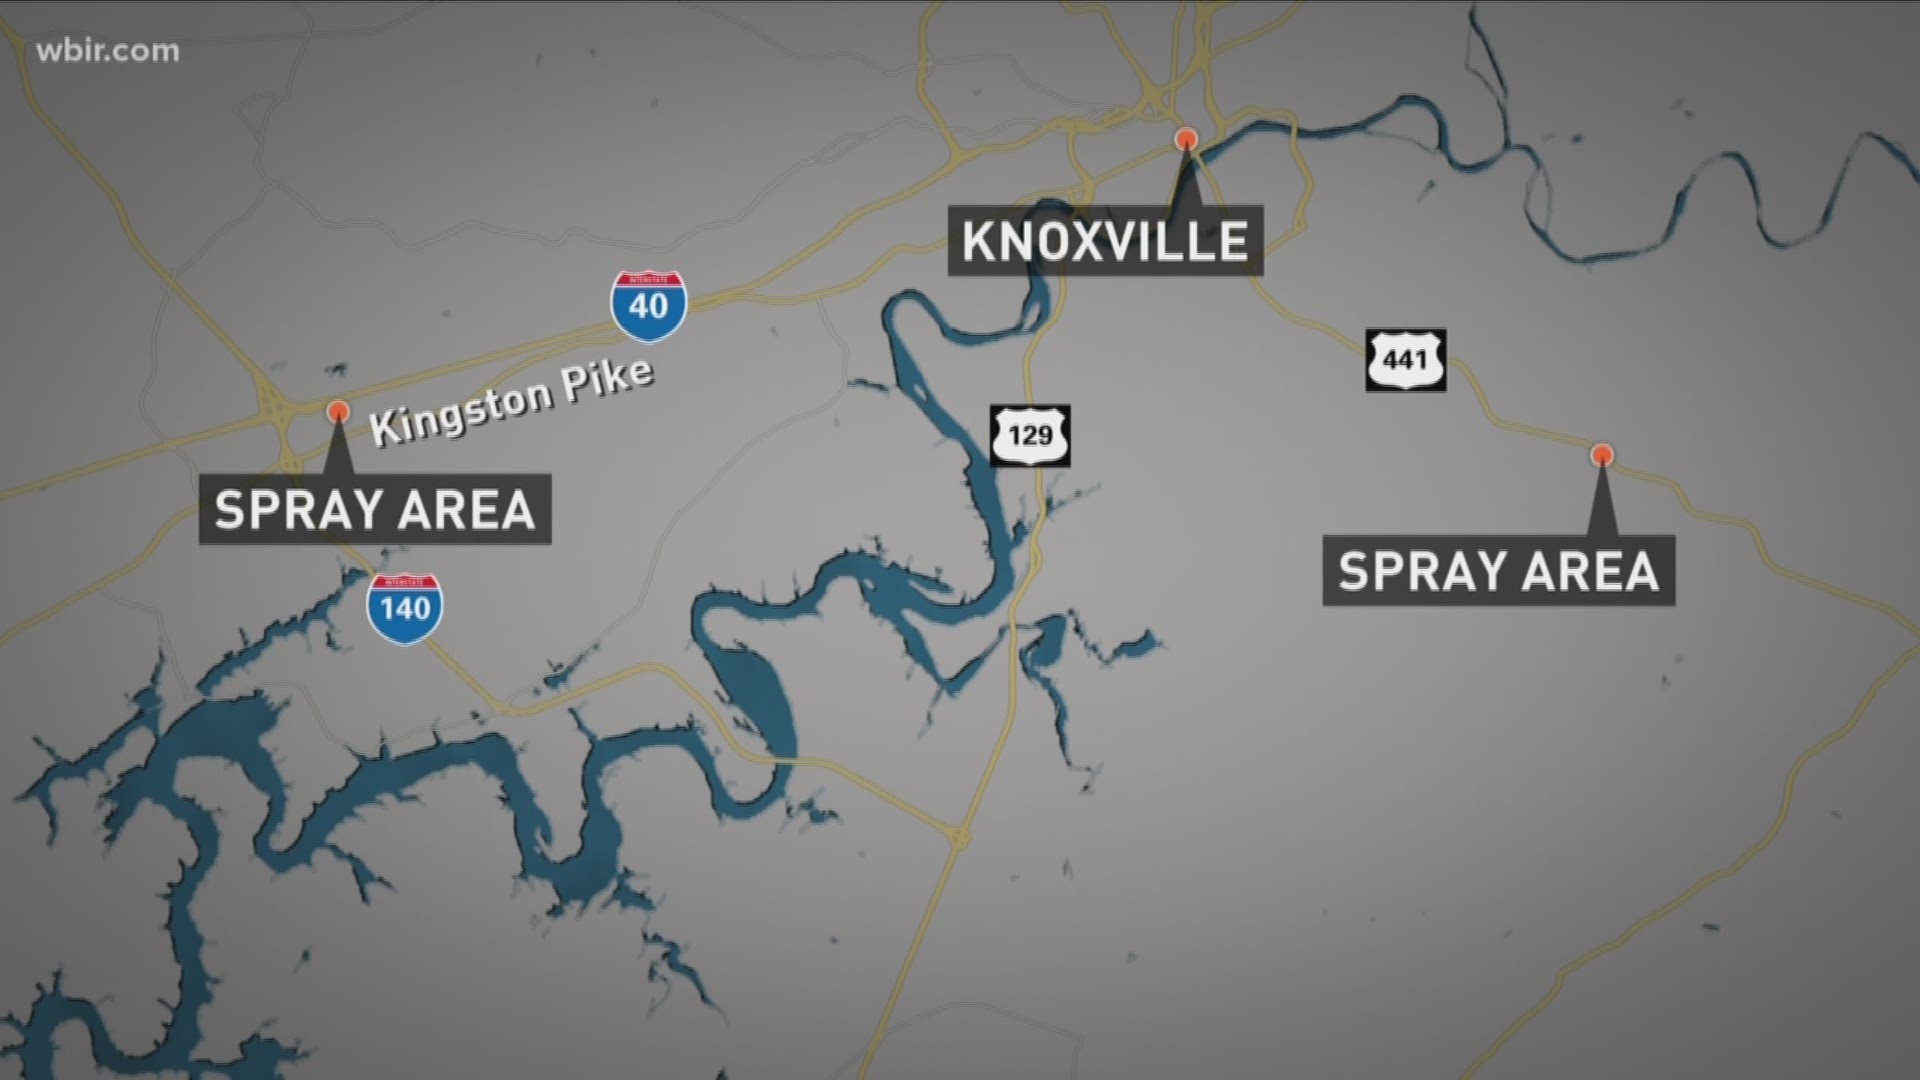 Knox County health leaders say some mosquitoes tested positive for West Nile Virus.